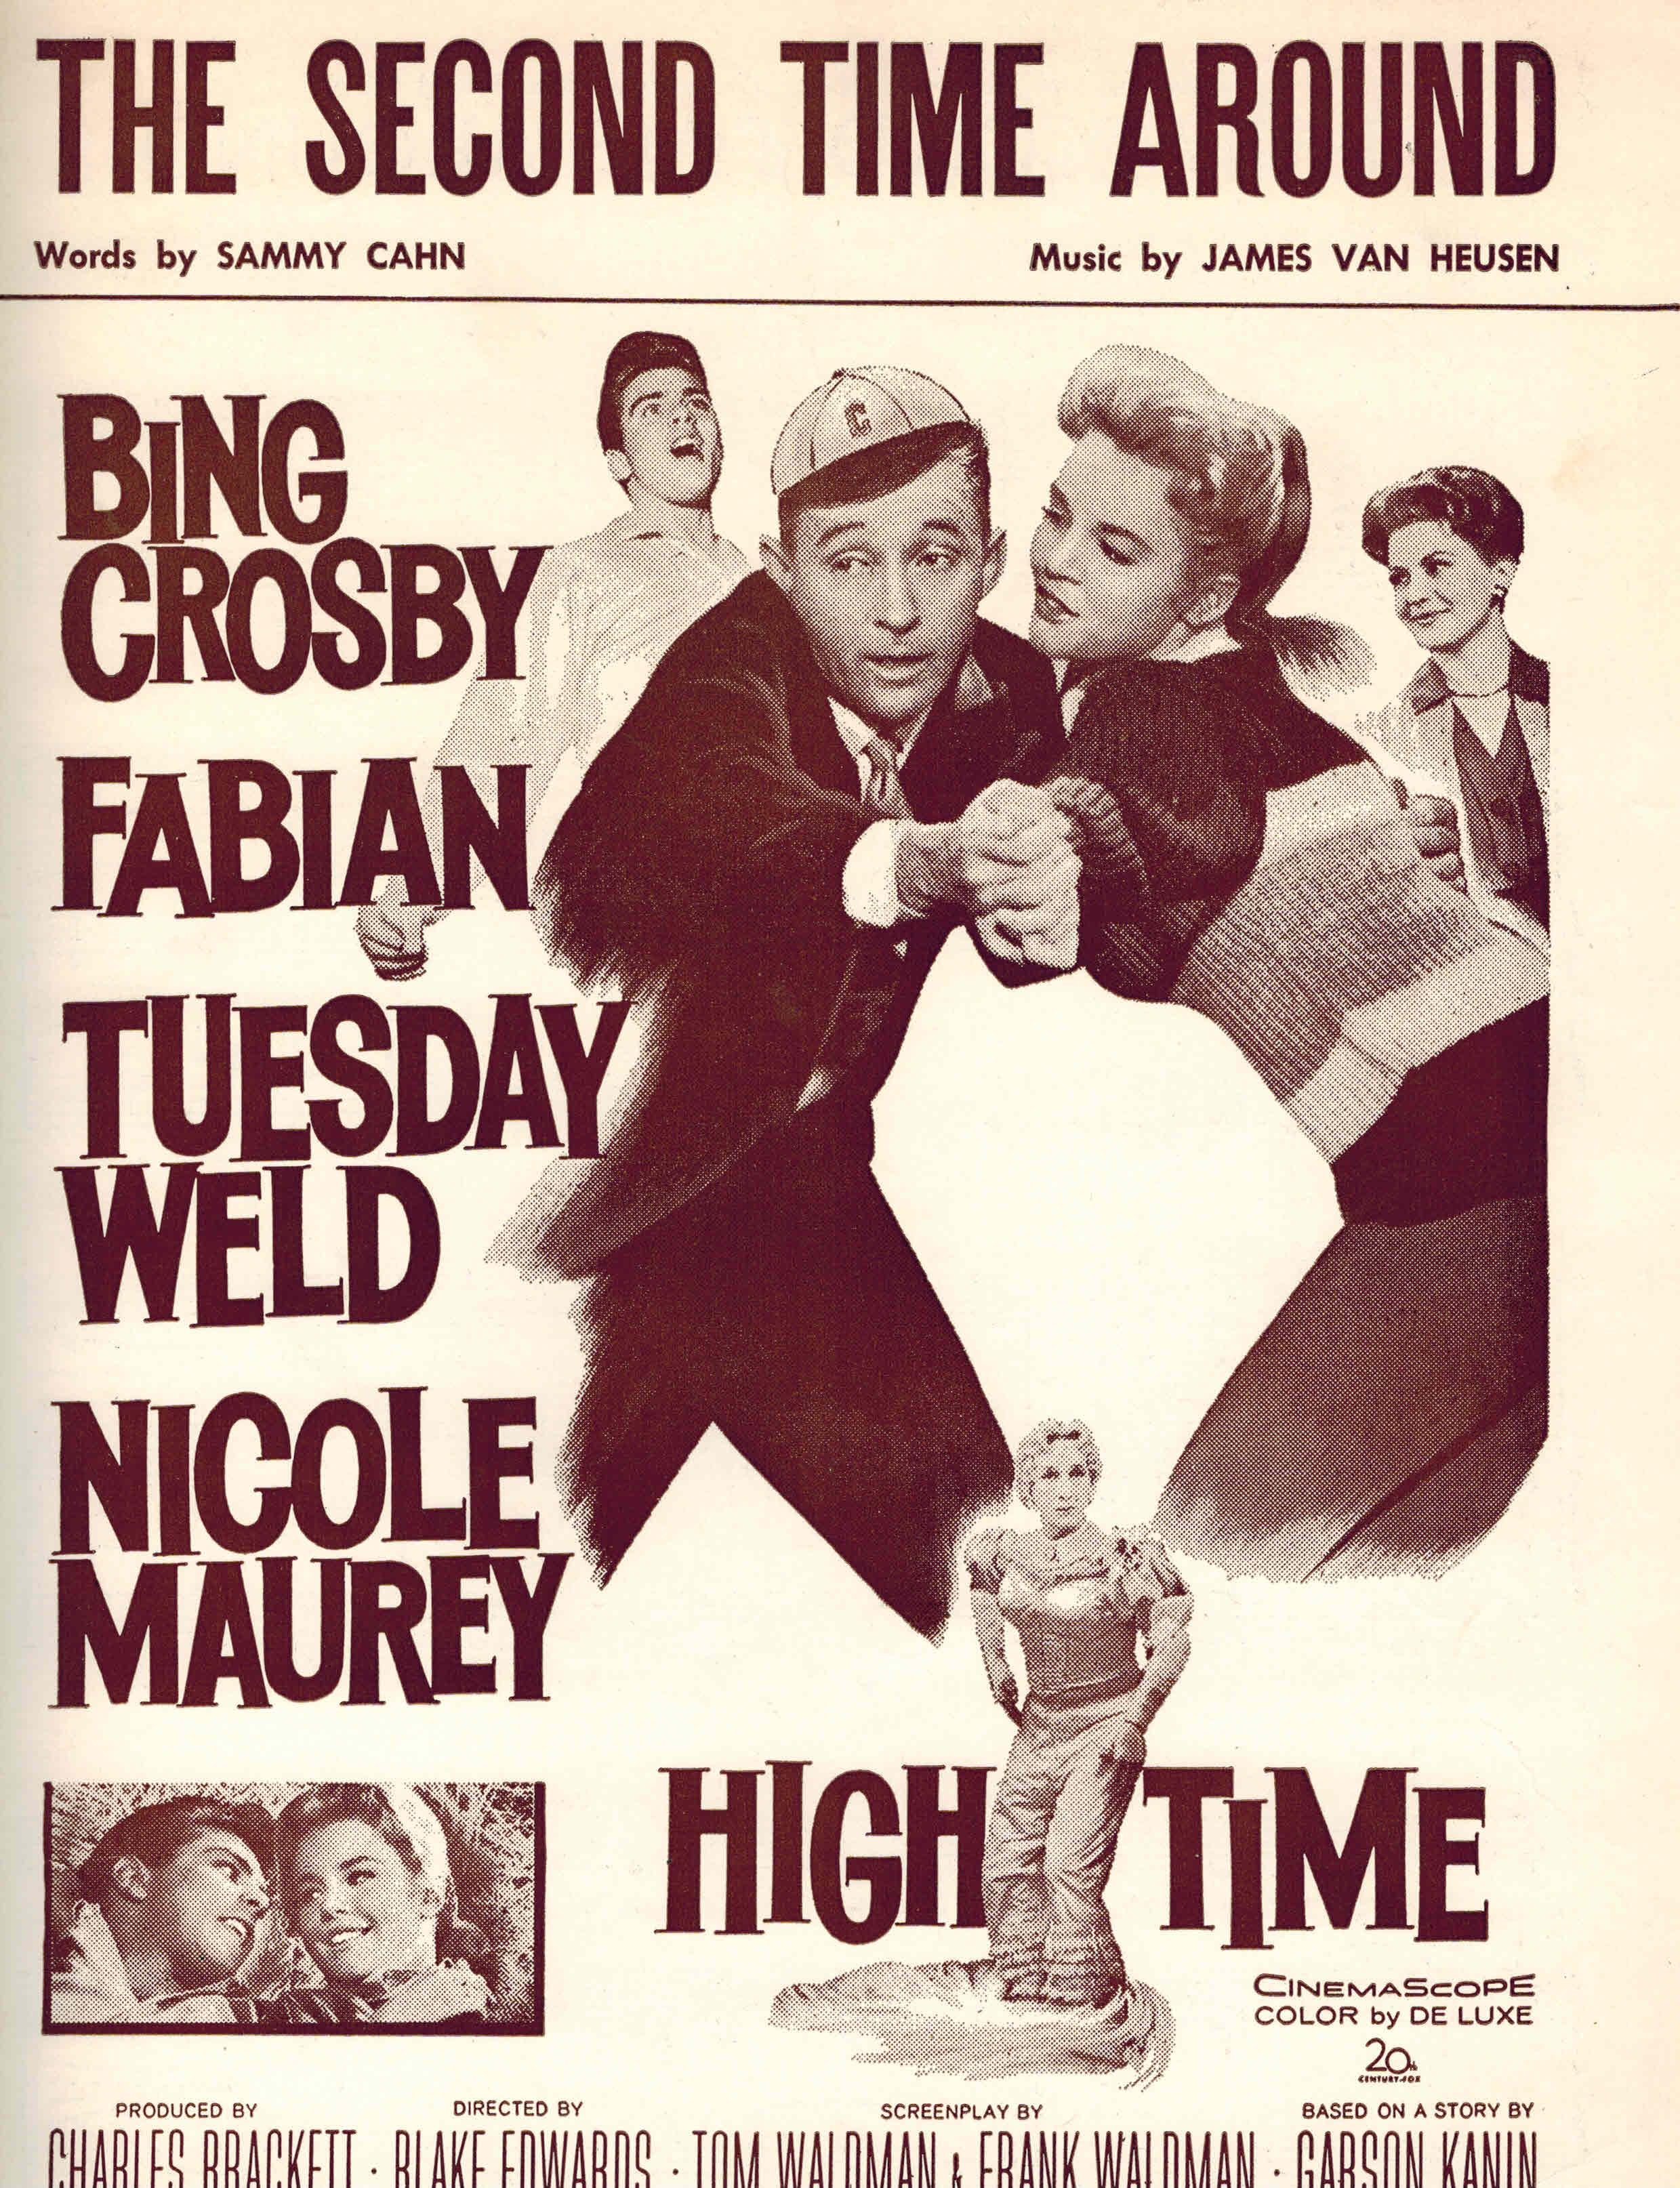 Image for Second Time Around - Sheet Music from High Time - Bing Crosby - Fabian - Tuesday Weld - Nicole Maurey Cover